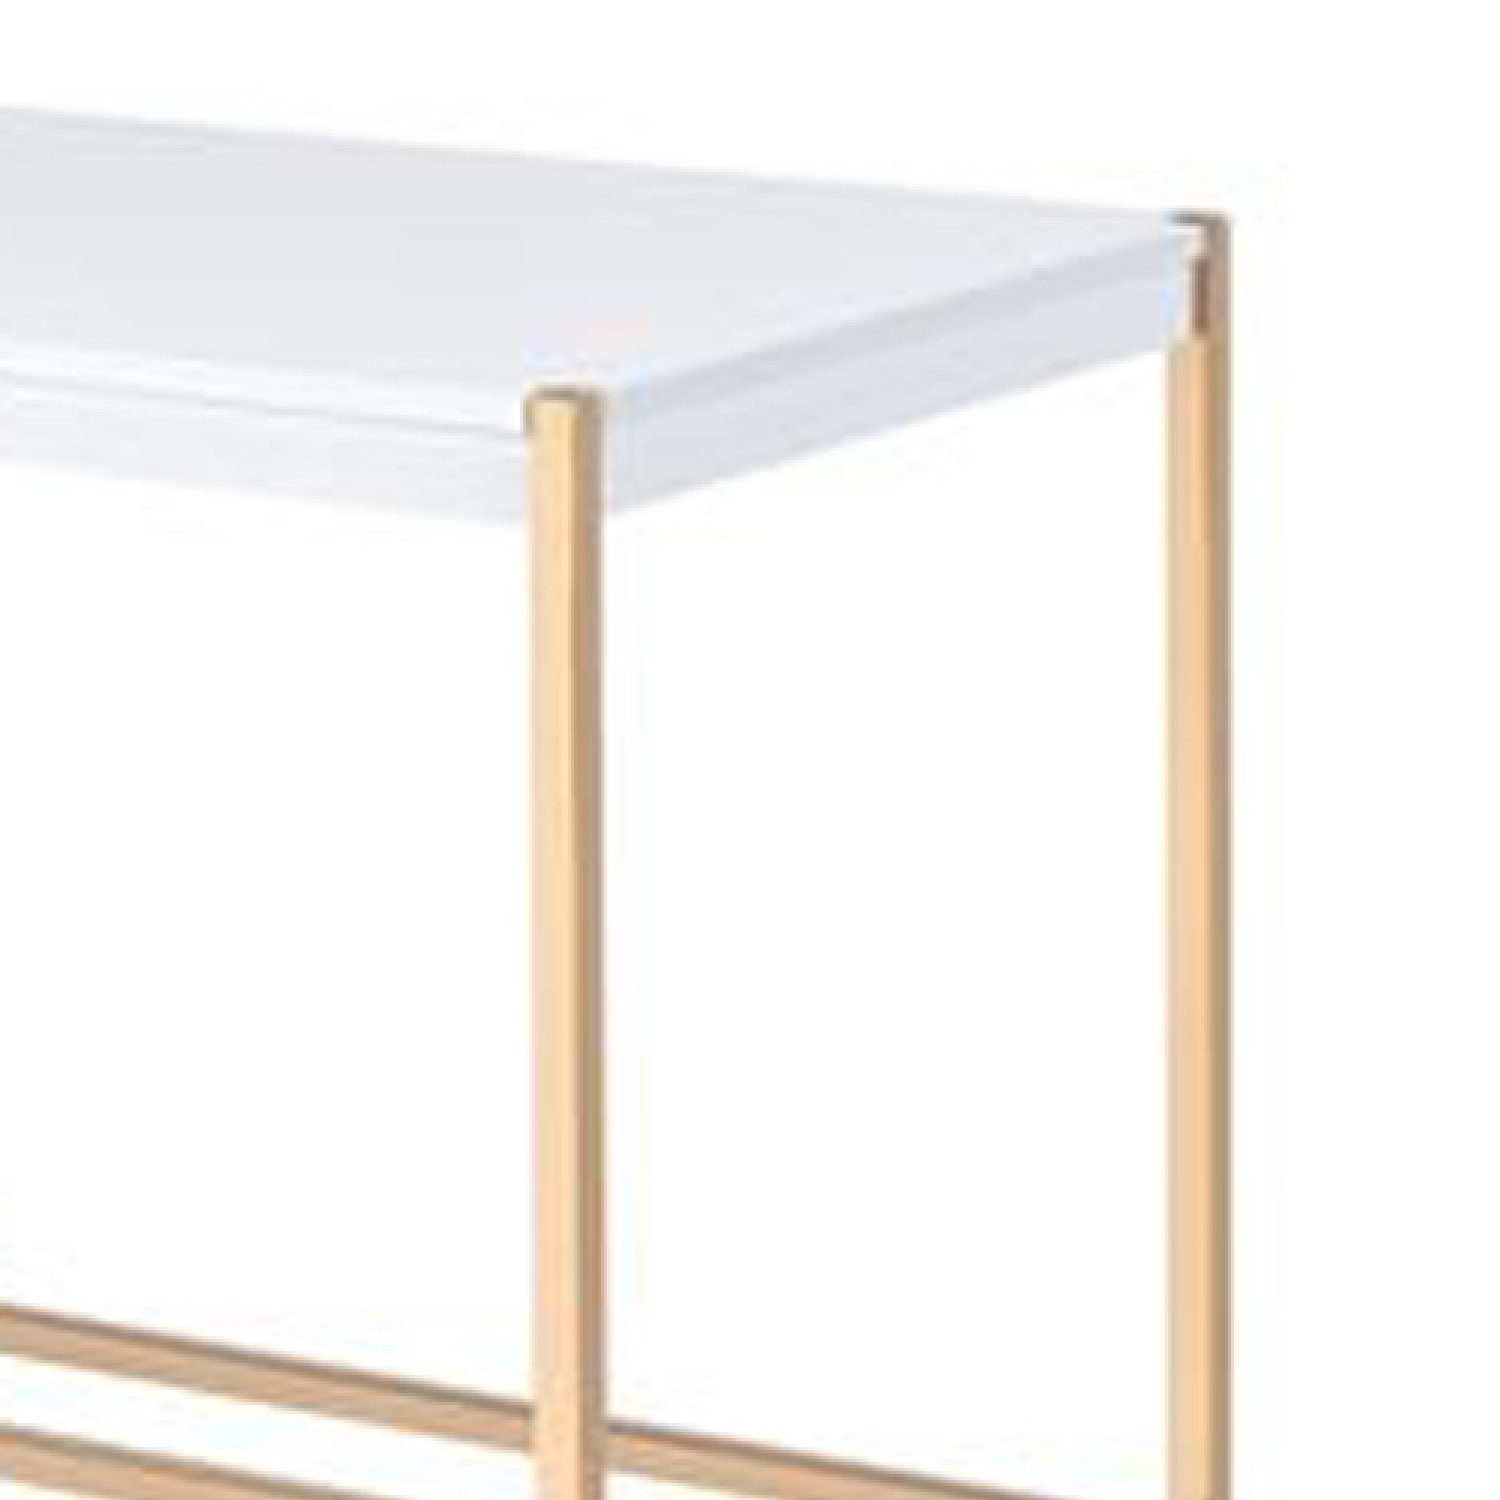 Writing Desk With USB Dock And Metal Legs, White And Rose Gold- Saltoro Sherpi